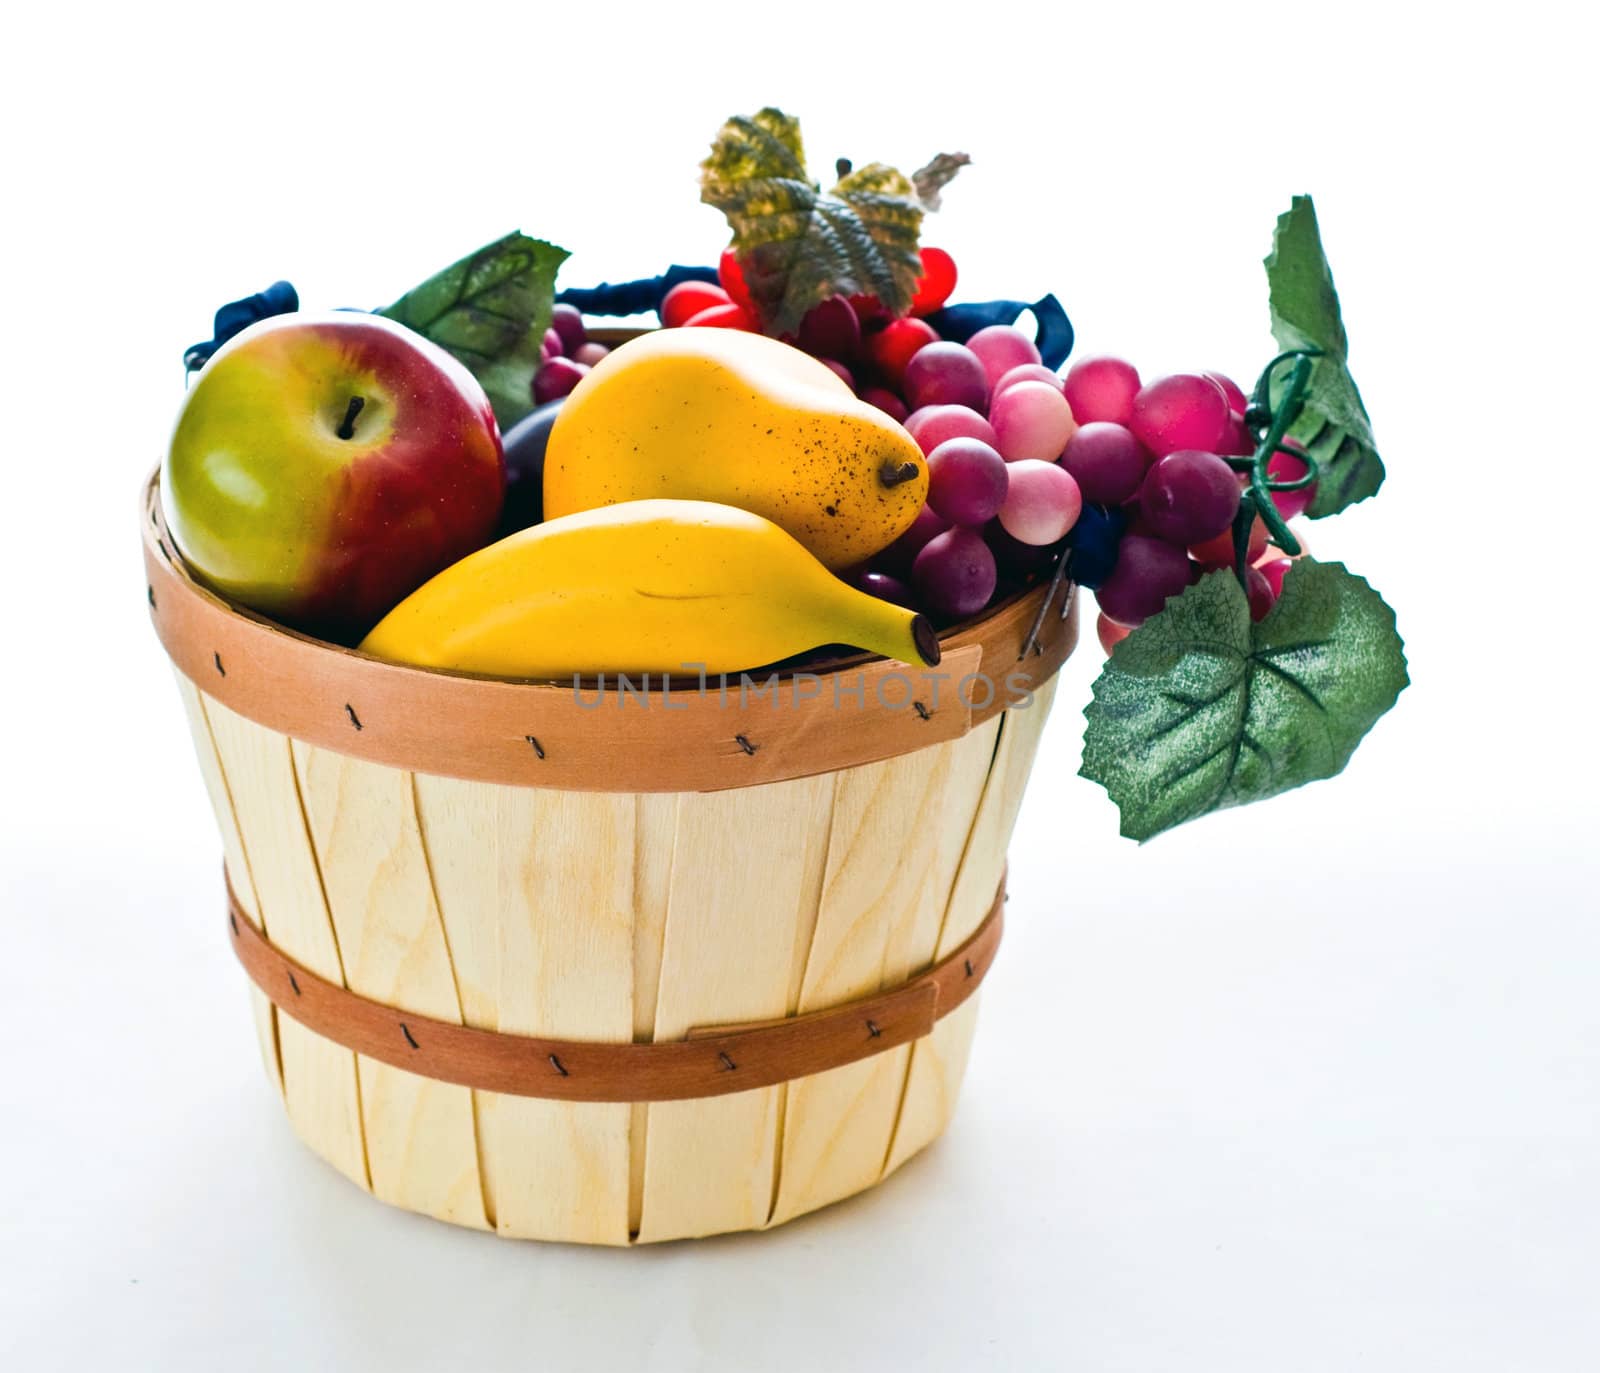 Basket containing fruit by rcarner